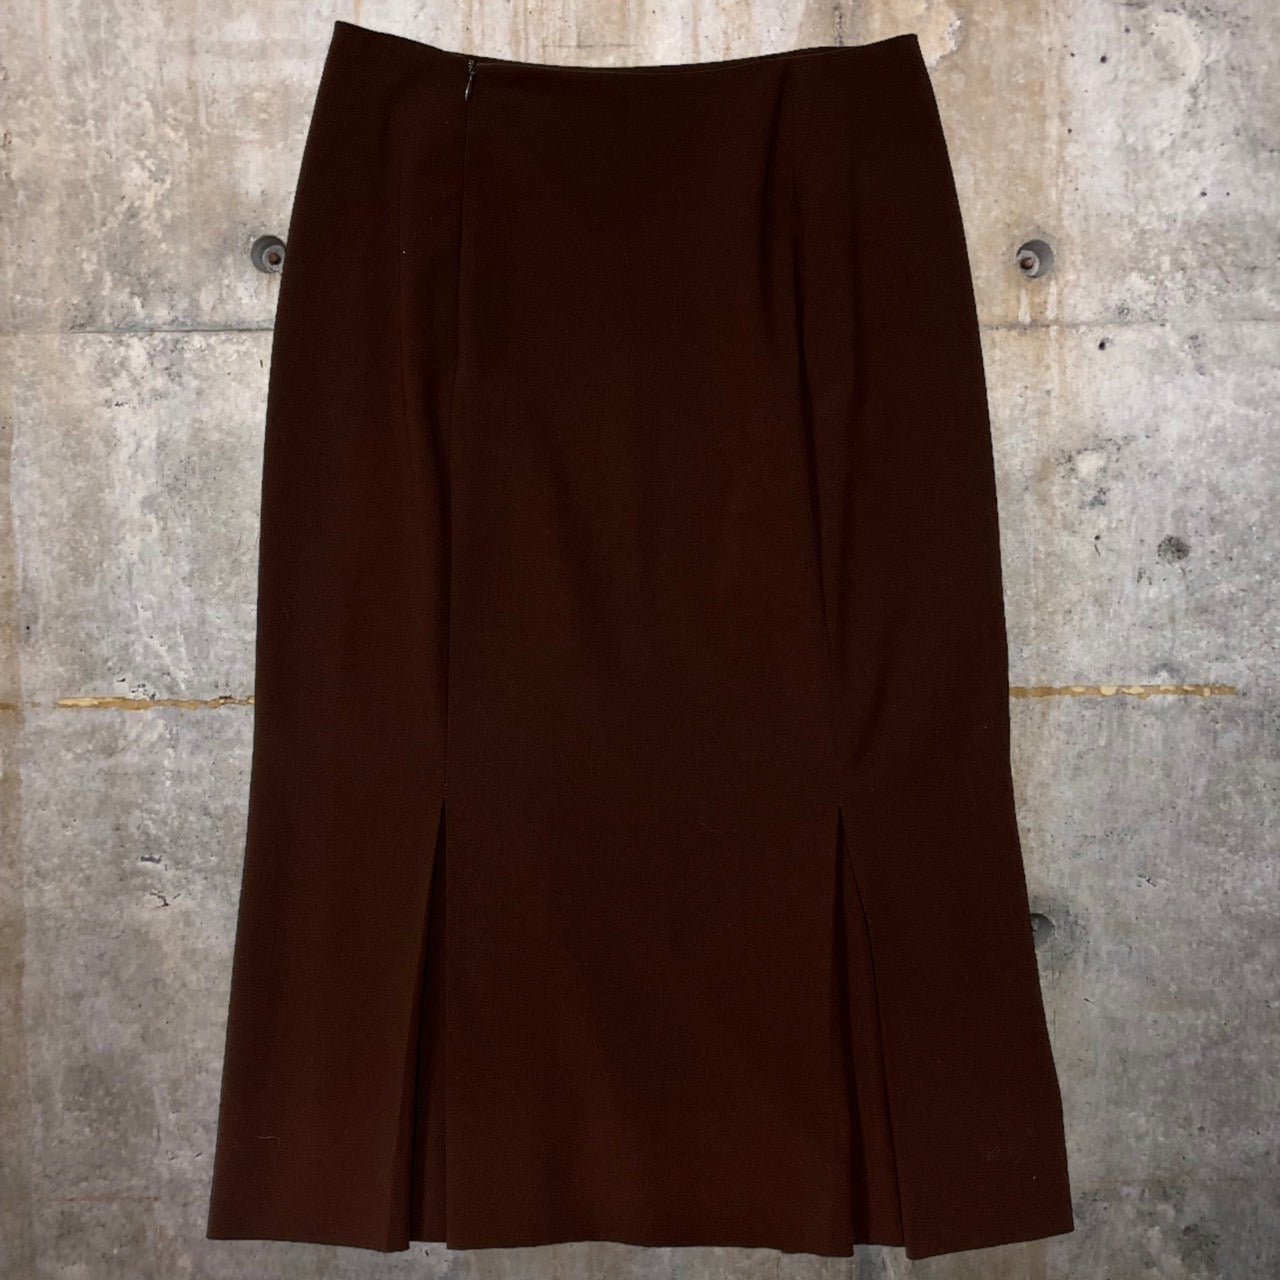 HERMES(エルメス) by Jean Paul Gaultier Stretch Wool Skirt/ゴルチエ 